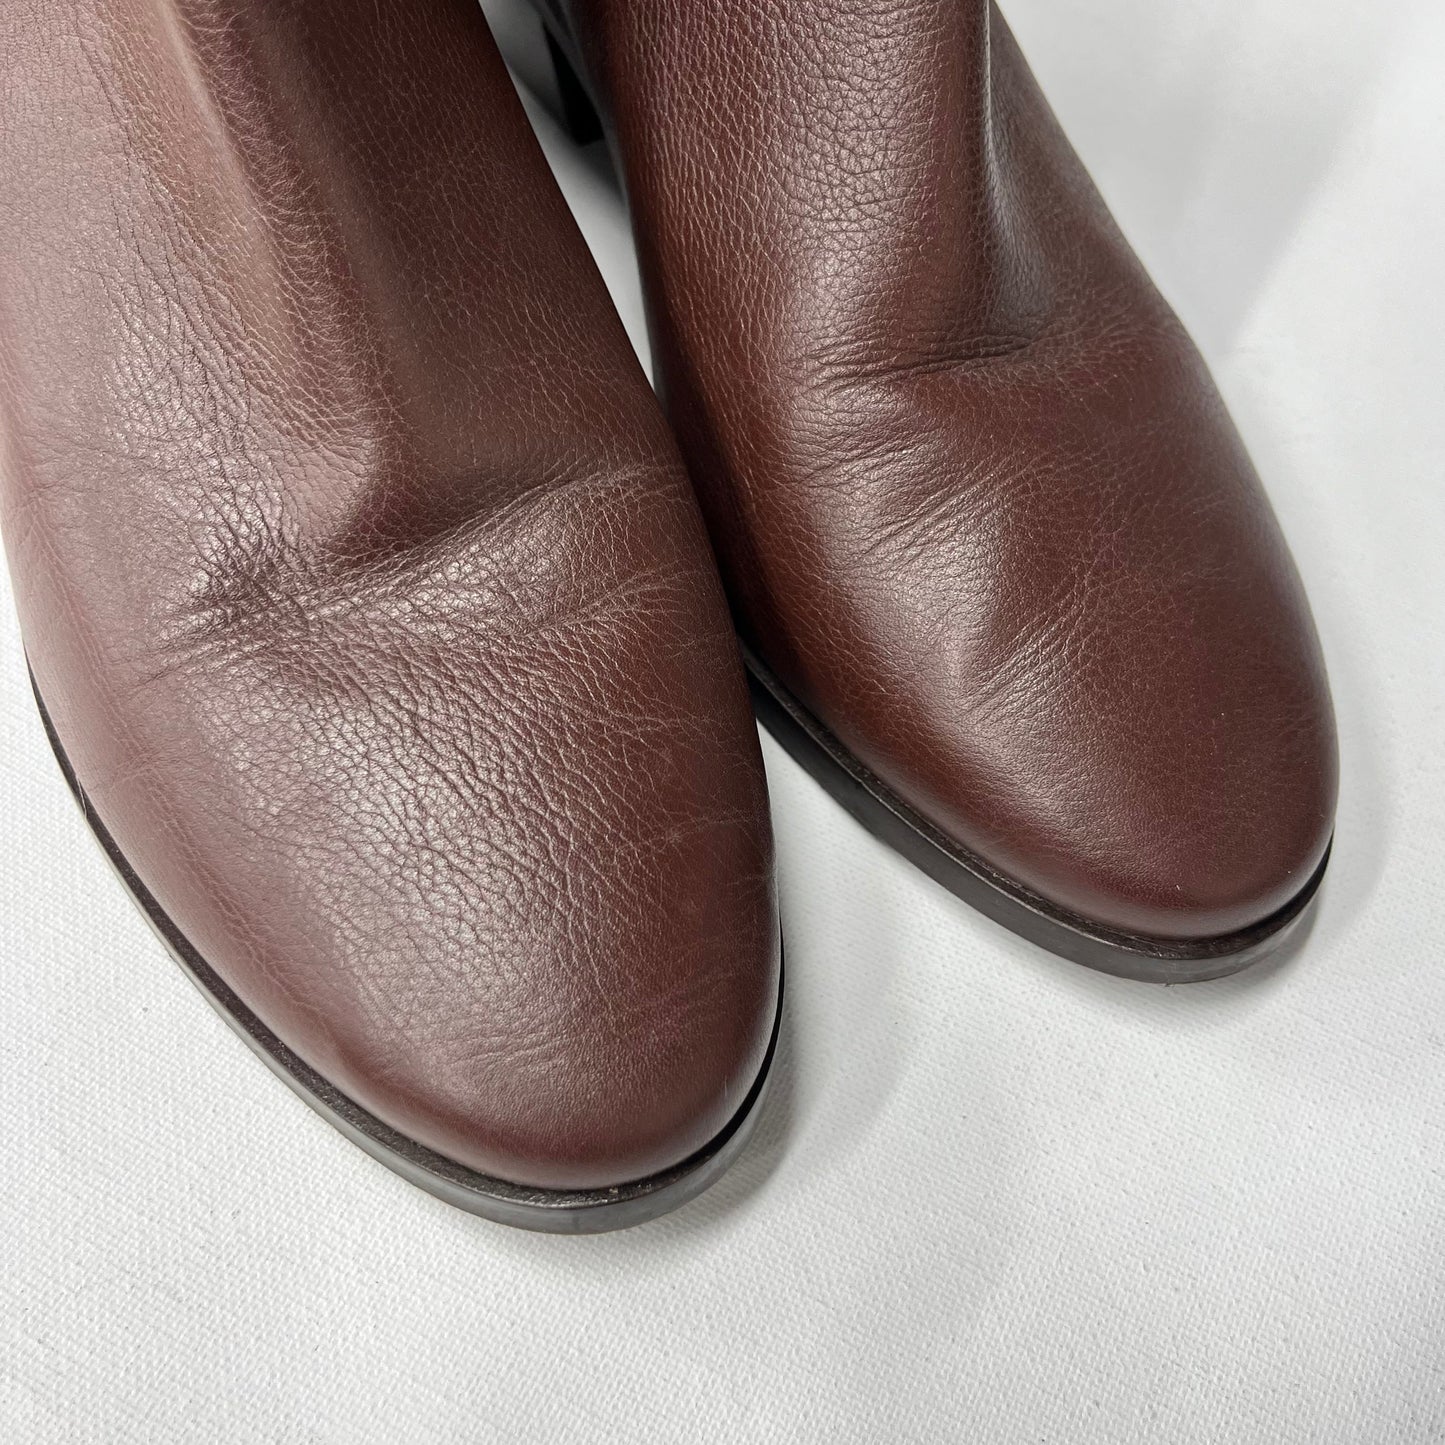 Boots Ankle Flats By Cole-haan  Size: 9.5